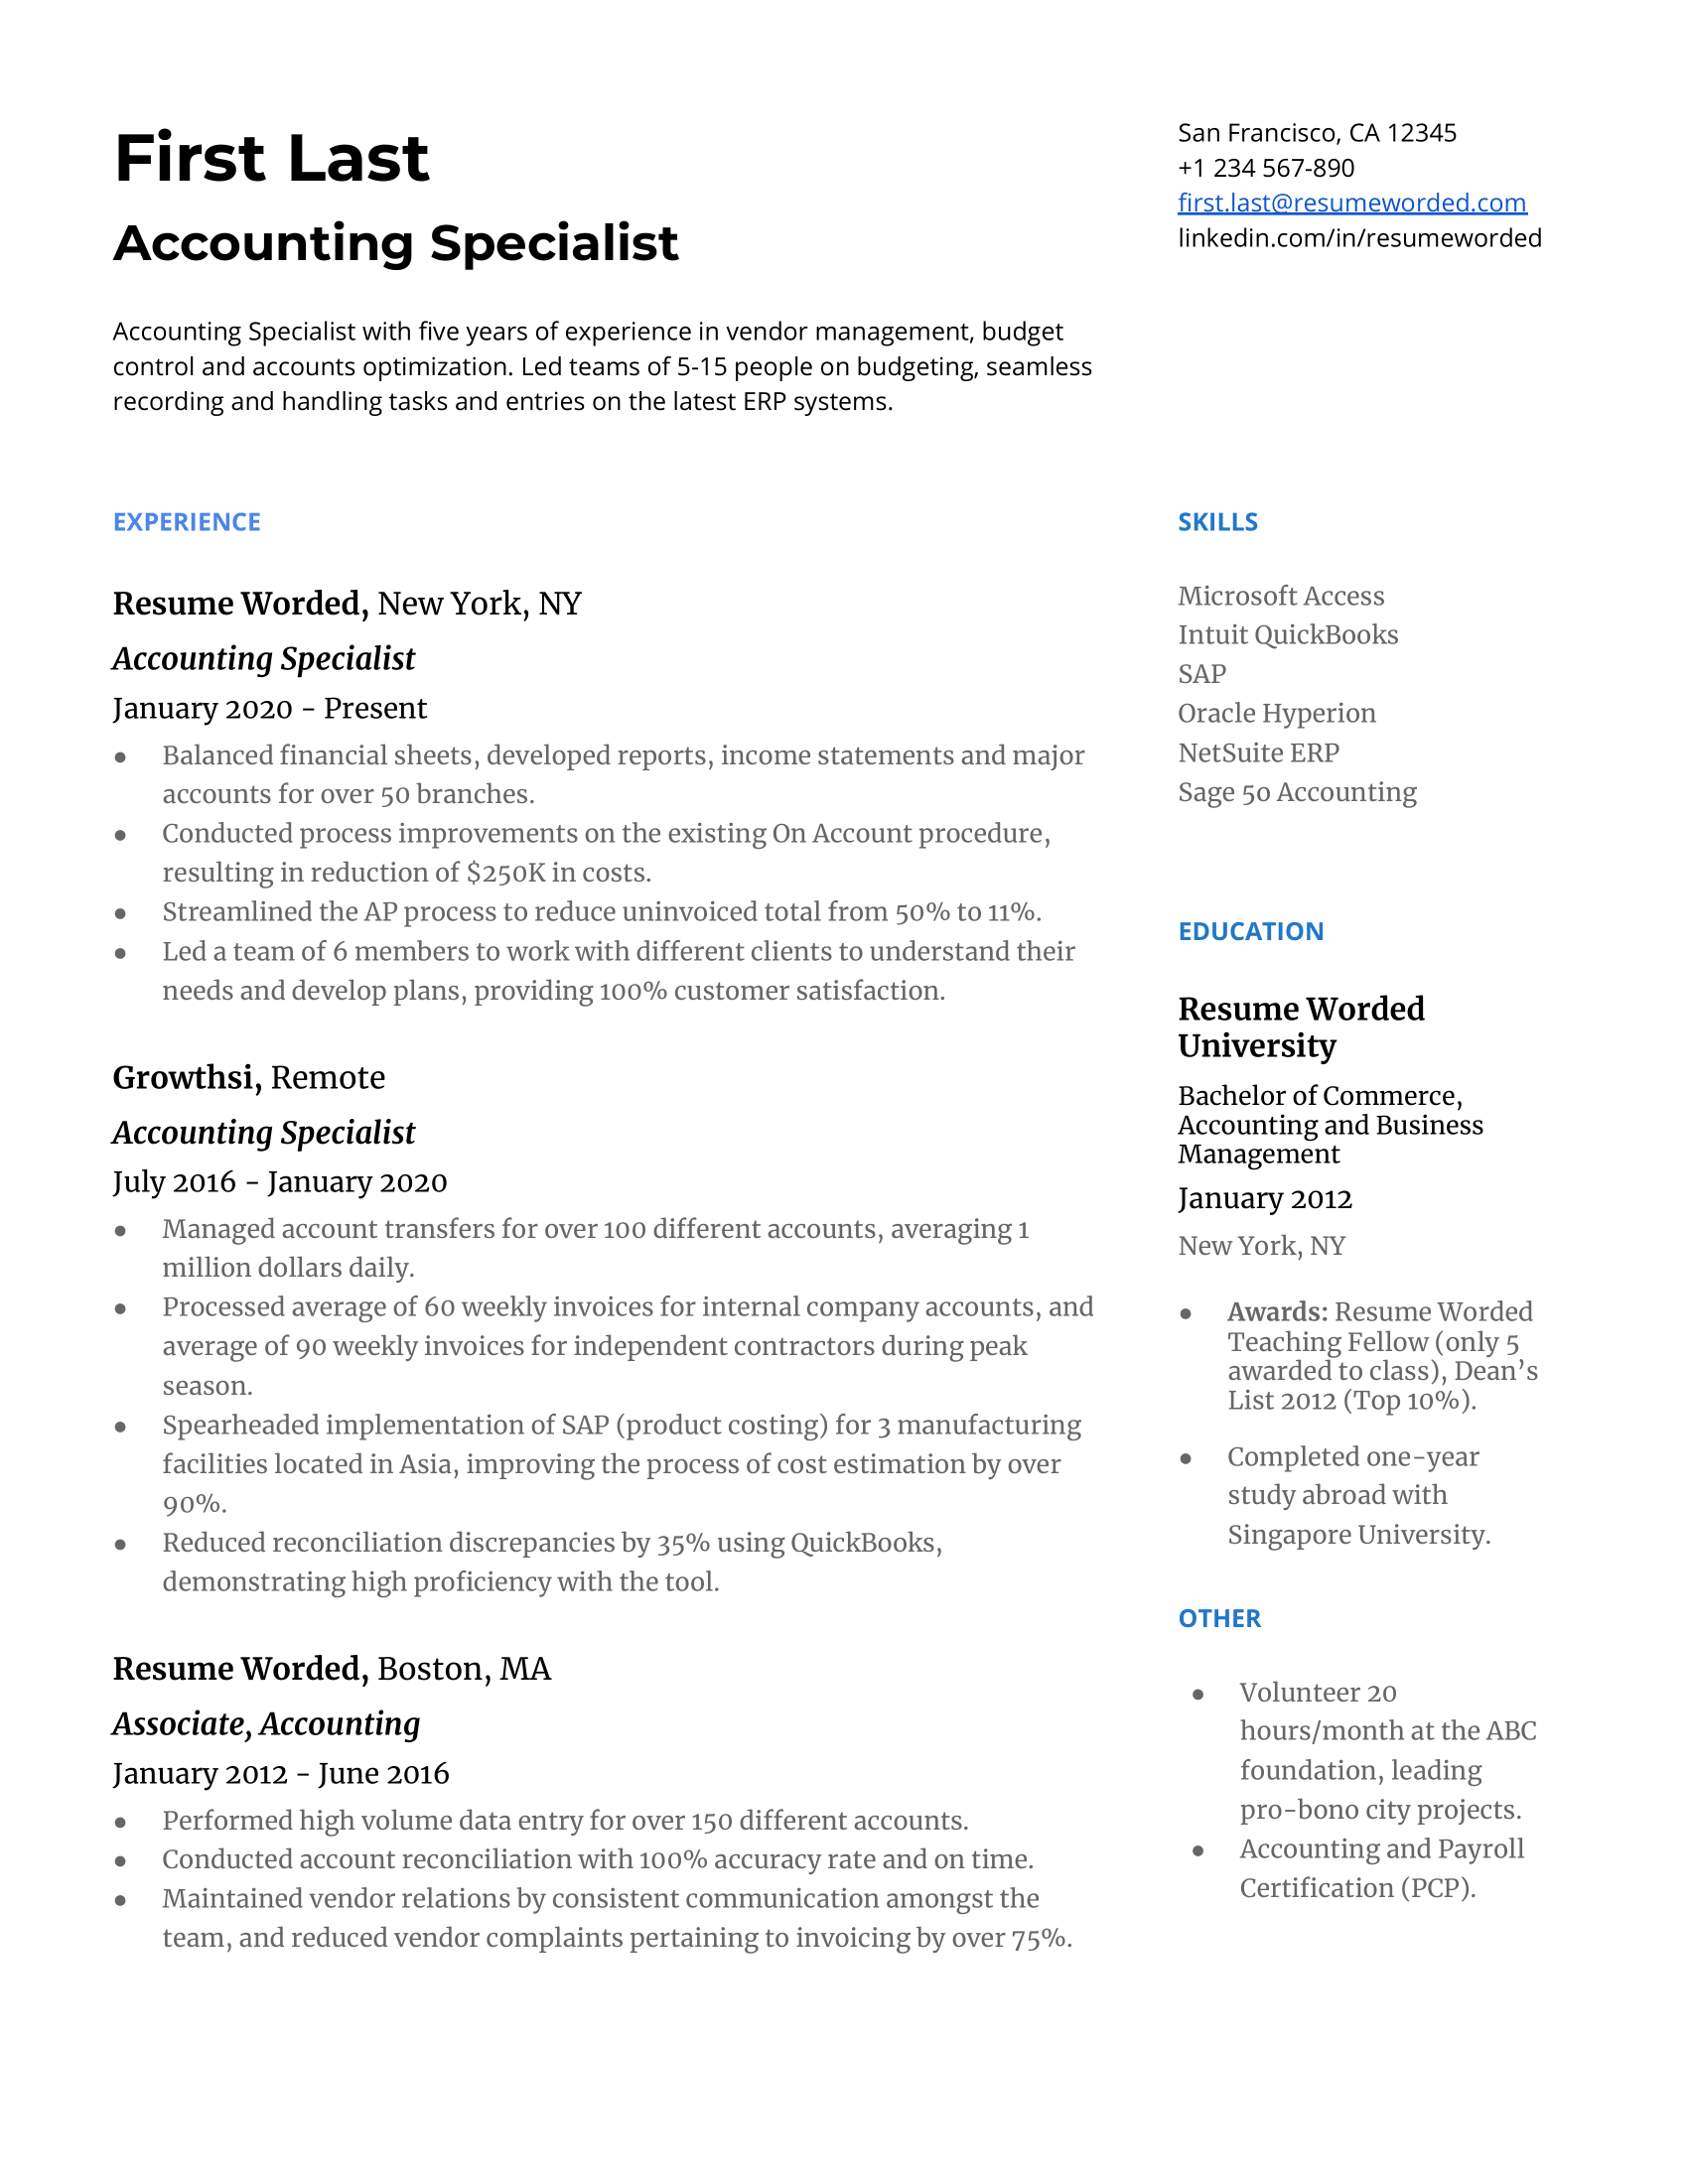 Accounting Specialist Resume Sample